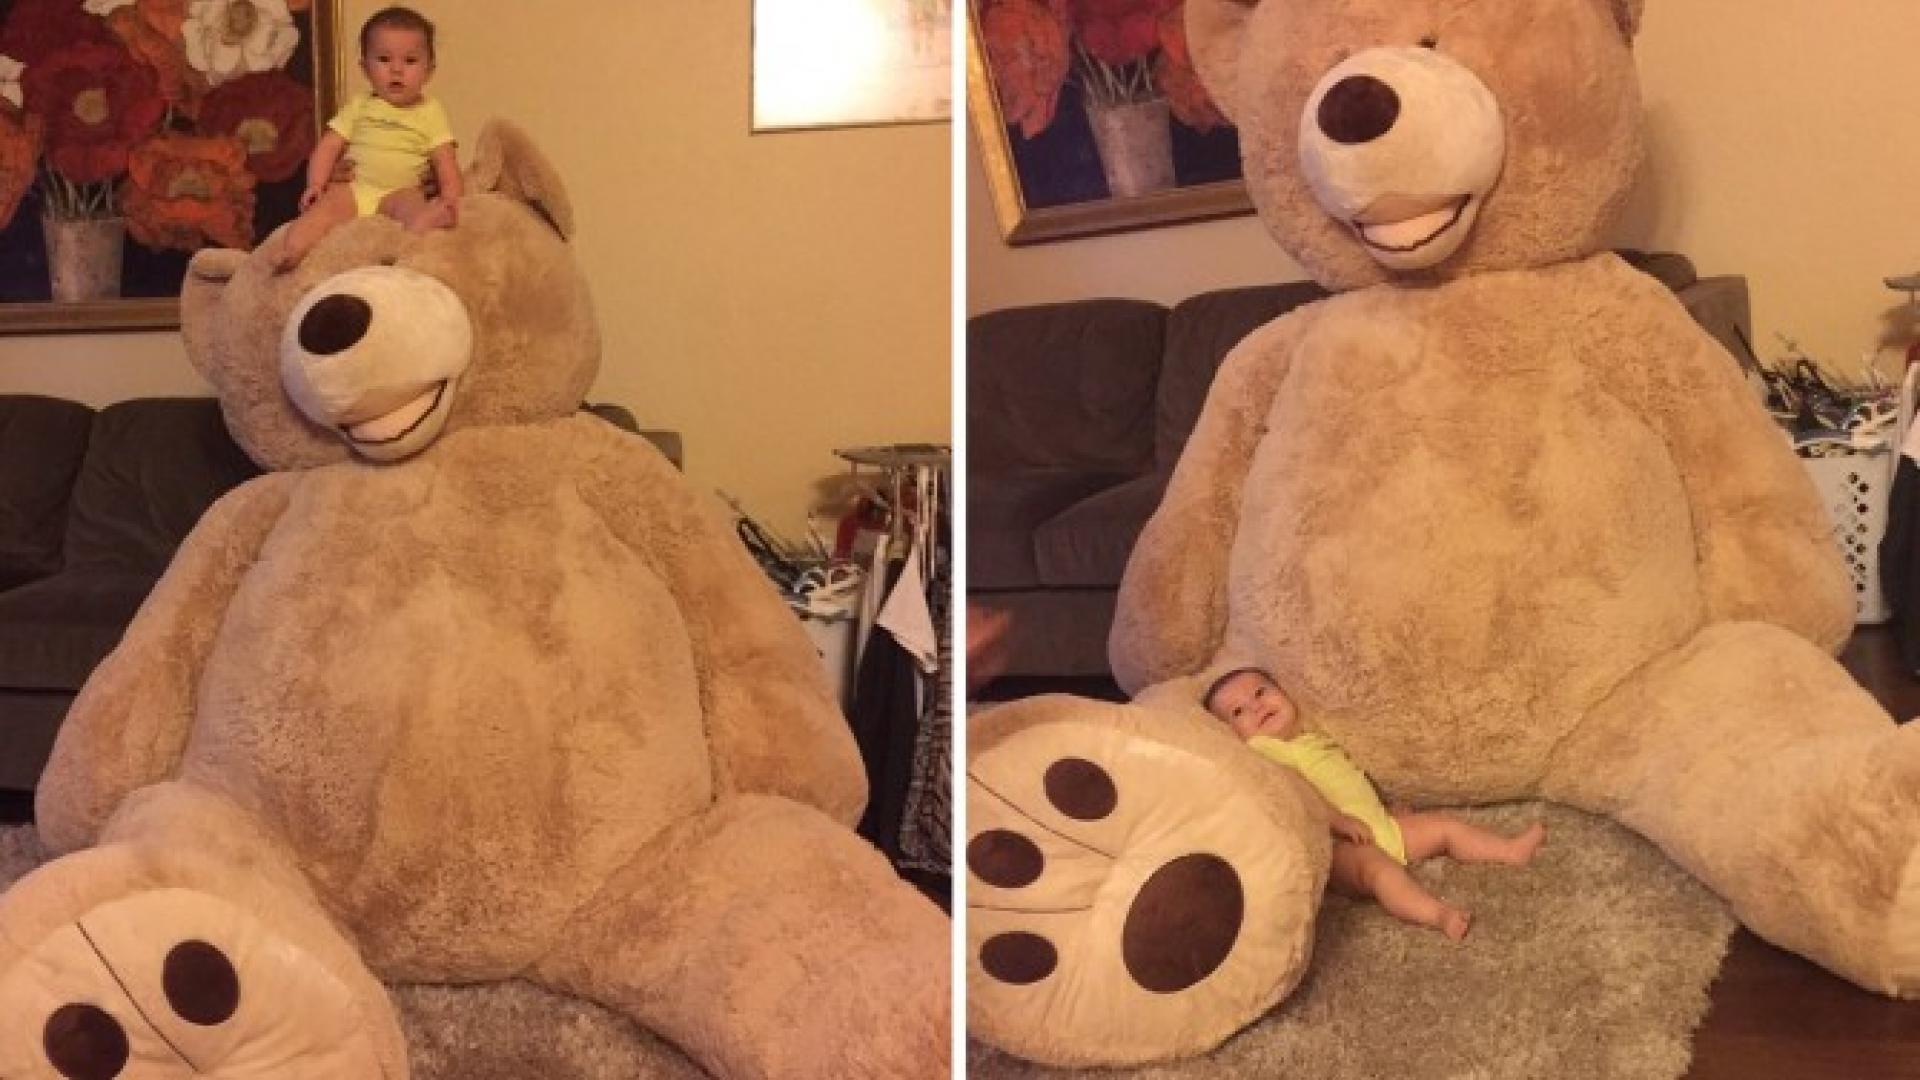 Grandfather Buys Baby Ridiculously Huge Teddy Bear Its Foot Alone Is Bigger Than Her Inside Edition